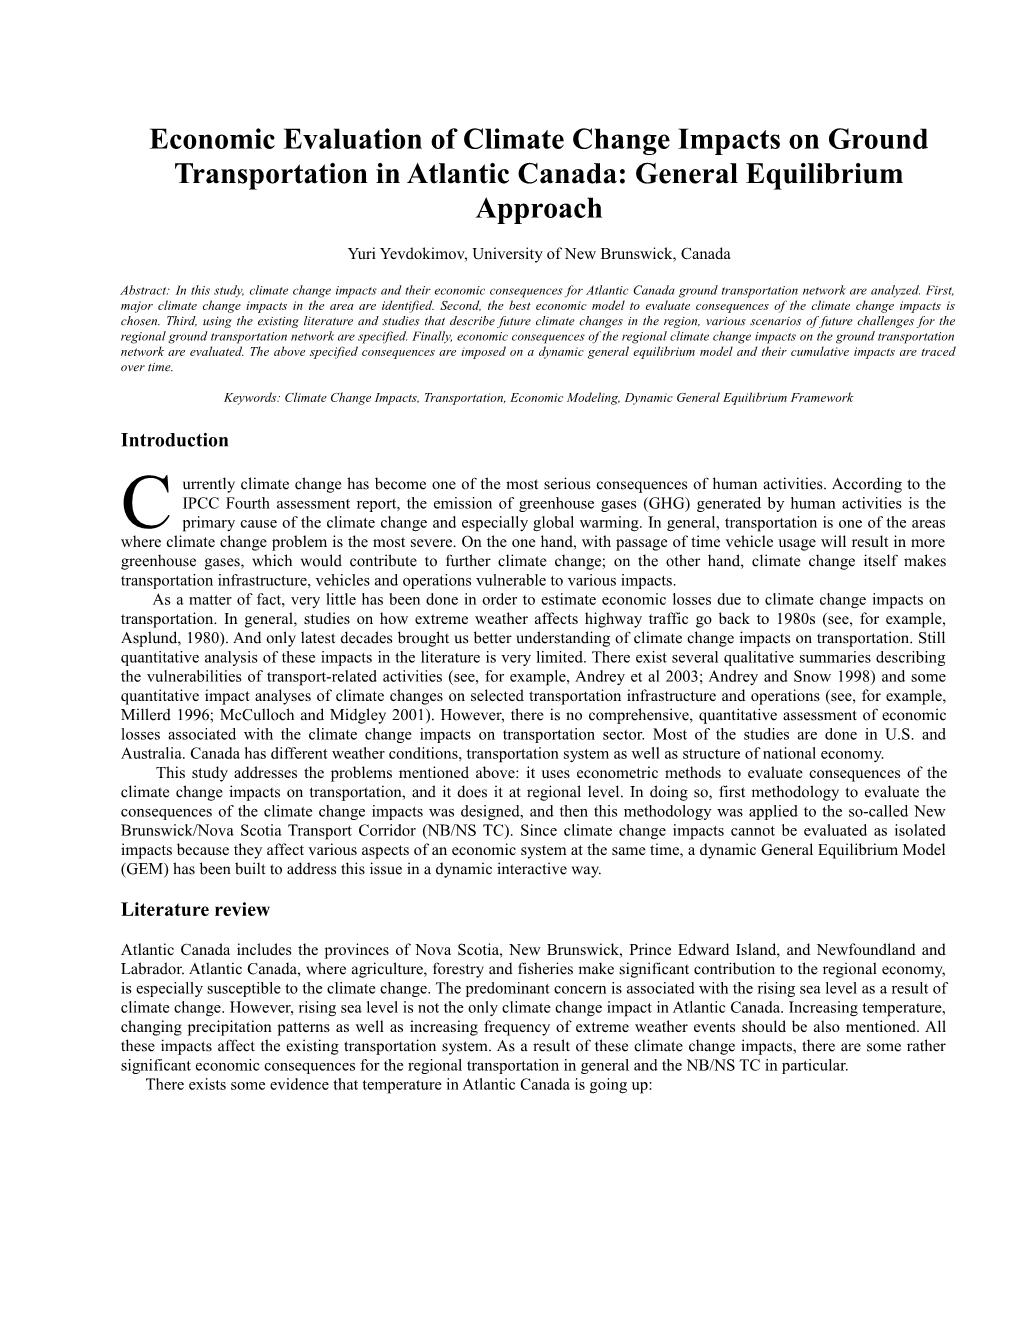 Economic Evaluation of Climate Change Impacts on Ground Transportation in Atlantic Canada